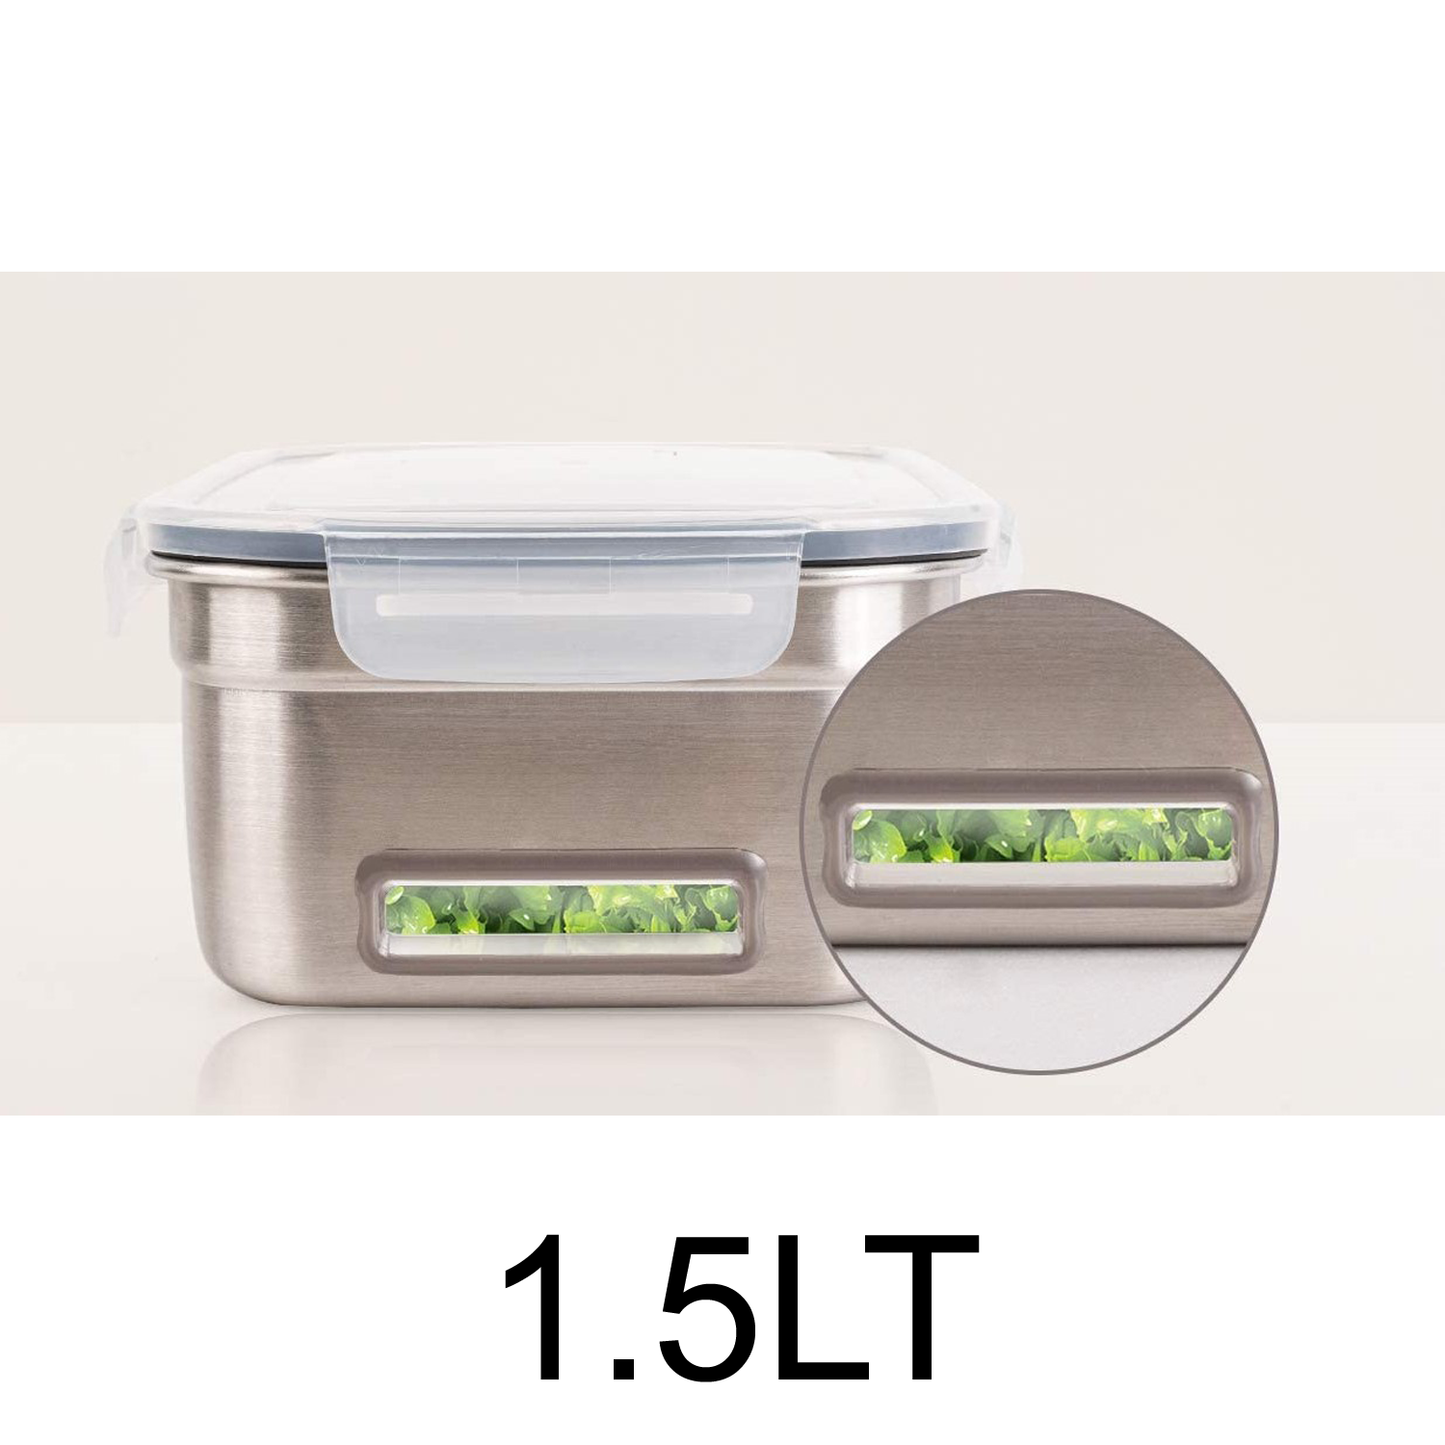 1.5L Fresh Produce Container With Flow-through Vent System